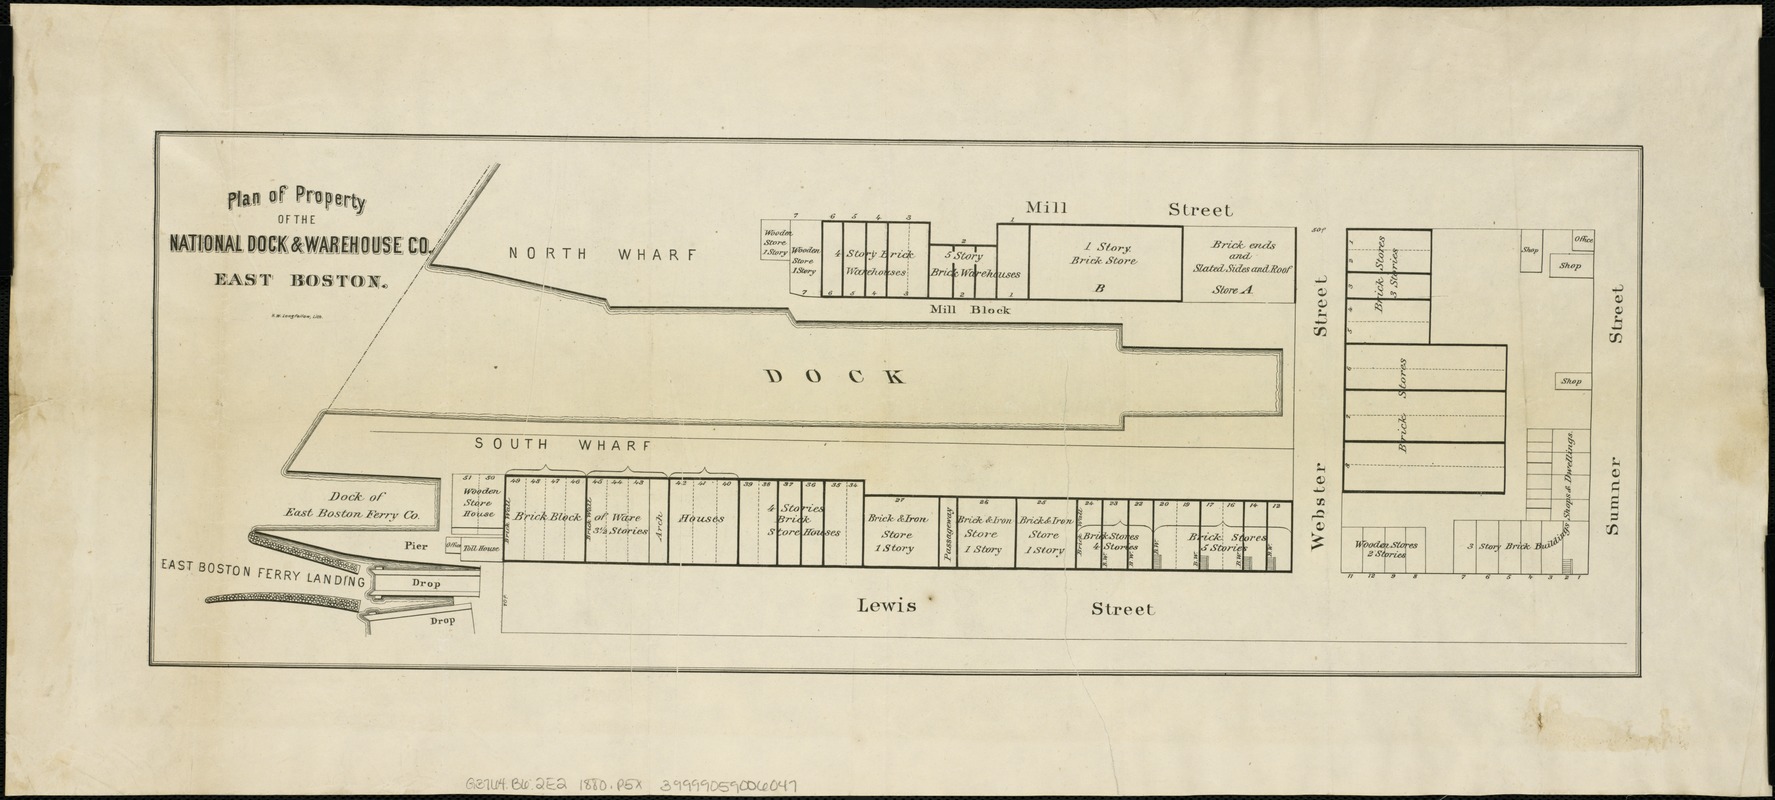 Plan of property of the National Dock & Warehouse Co. East Boston